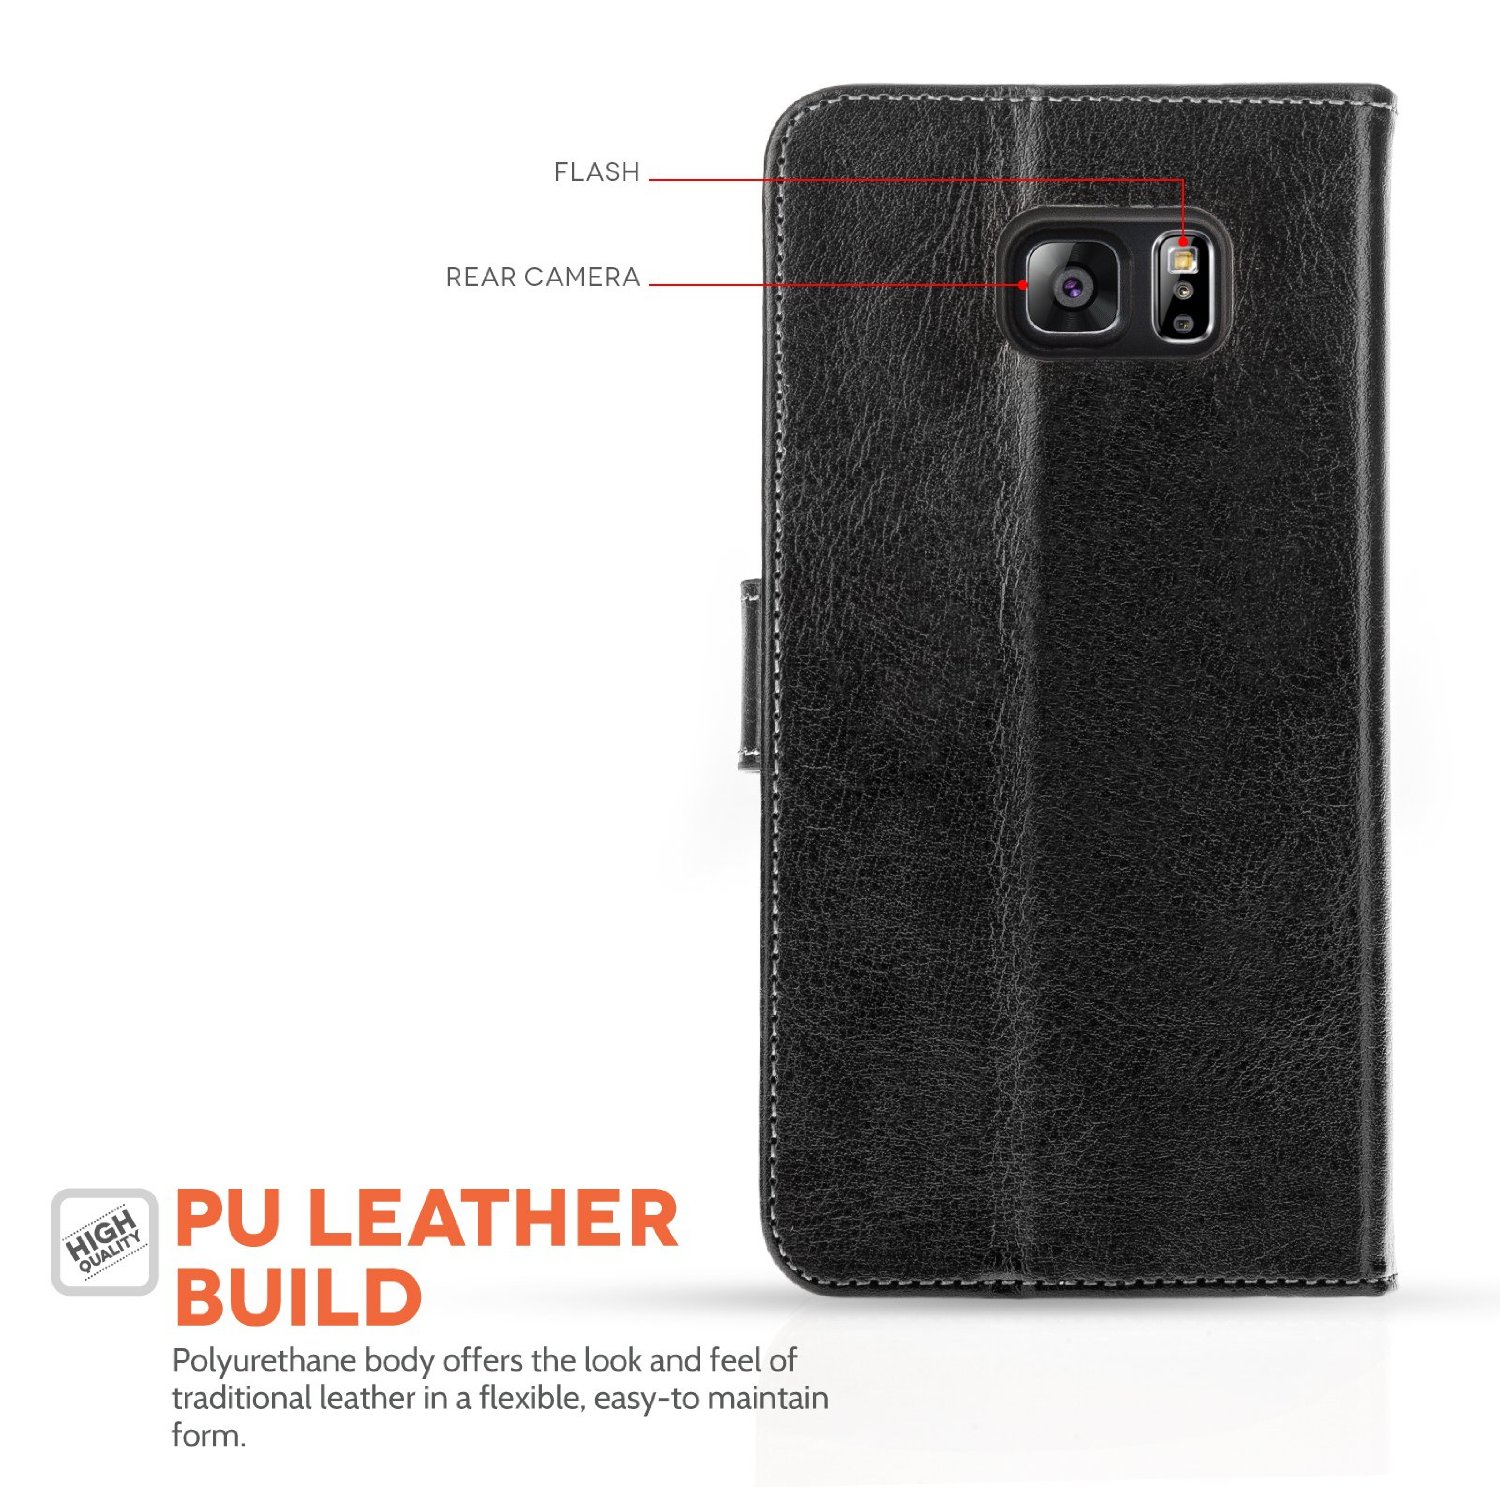 Yousave Accessories Samsung Galaxy S6 Edge Plus PU Leather Stand Wallet -Black